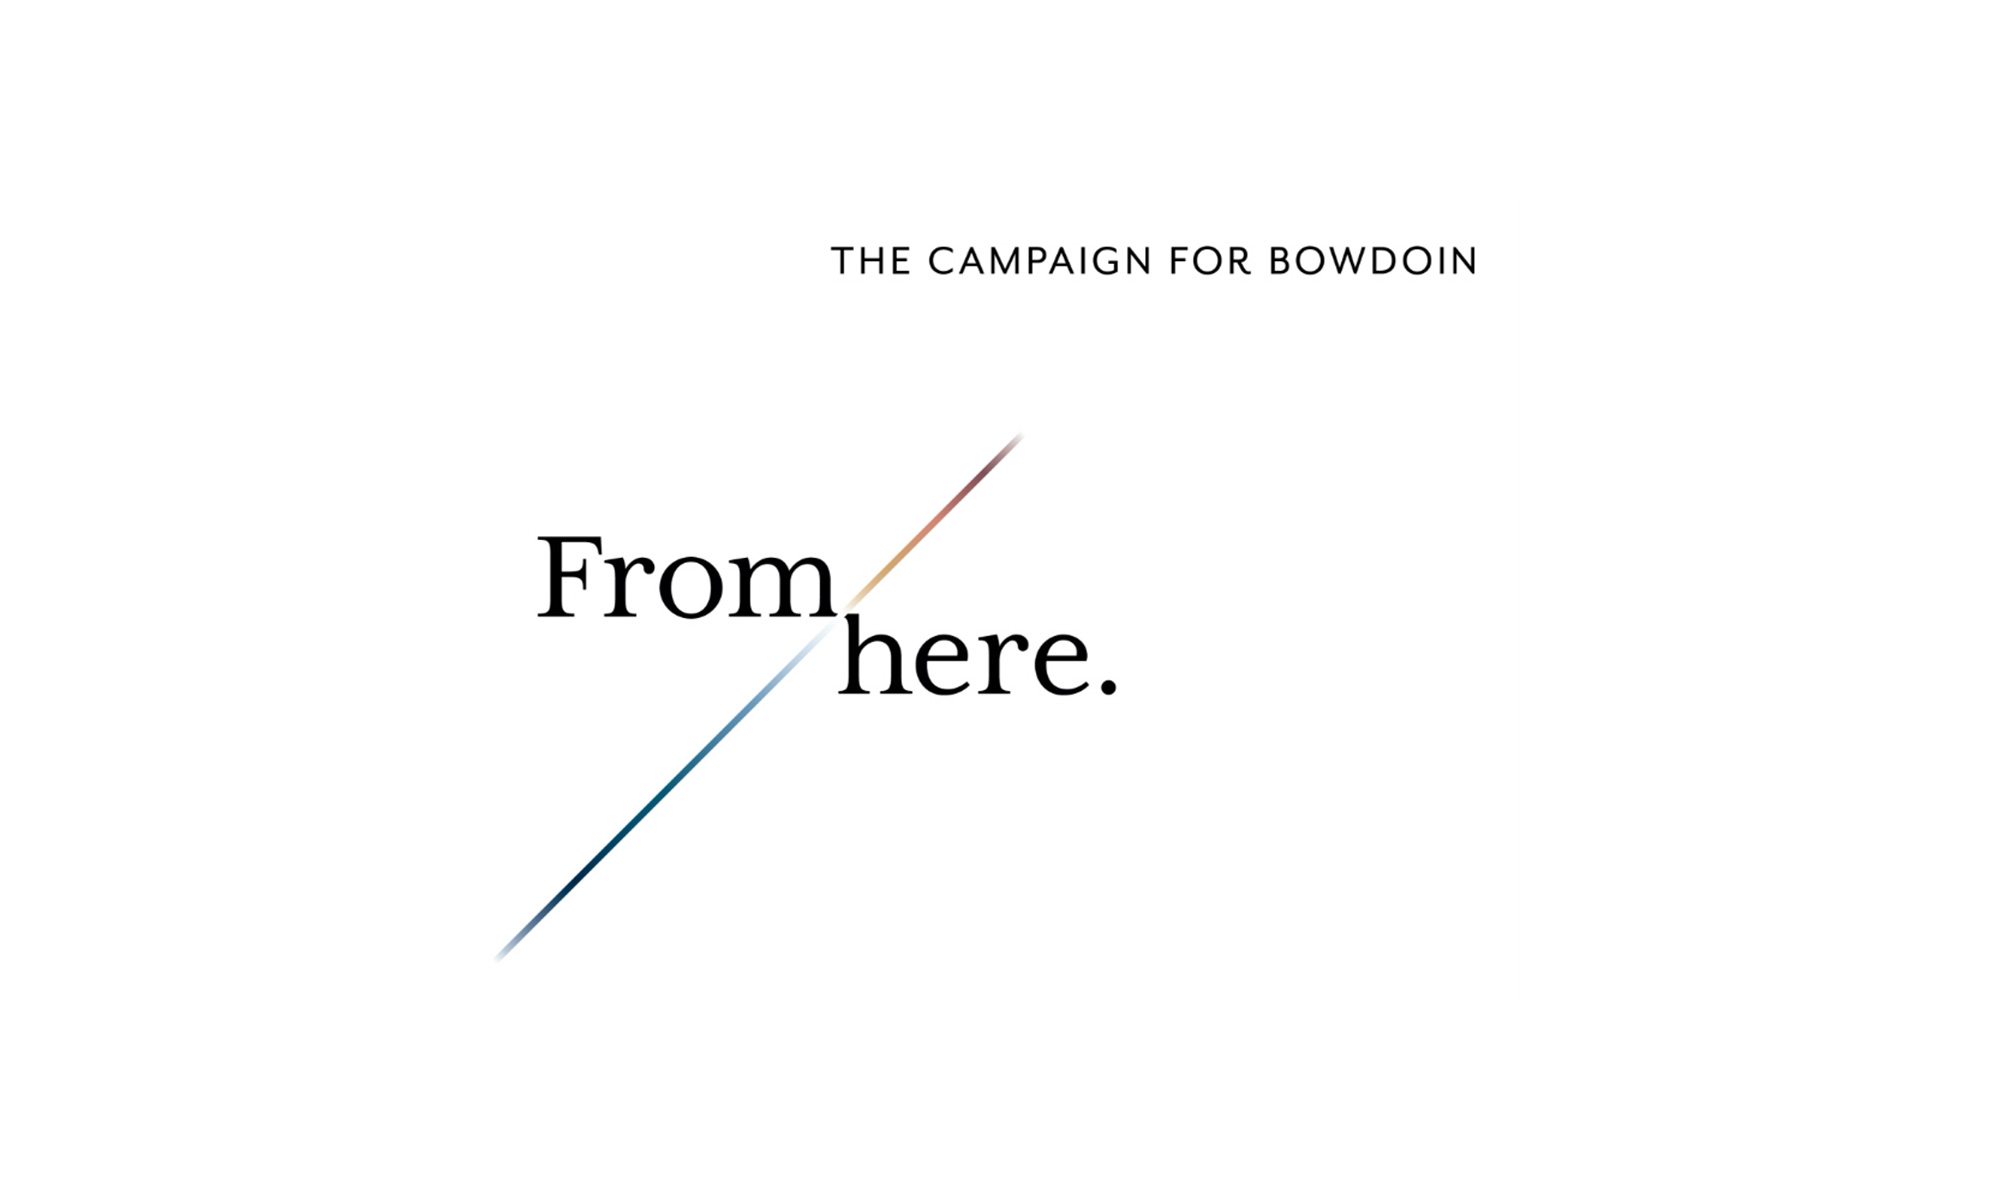 The campaign for Bowdoin. From here.